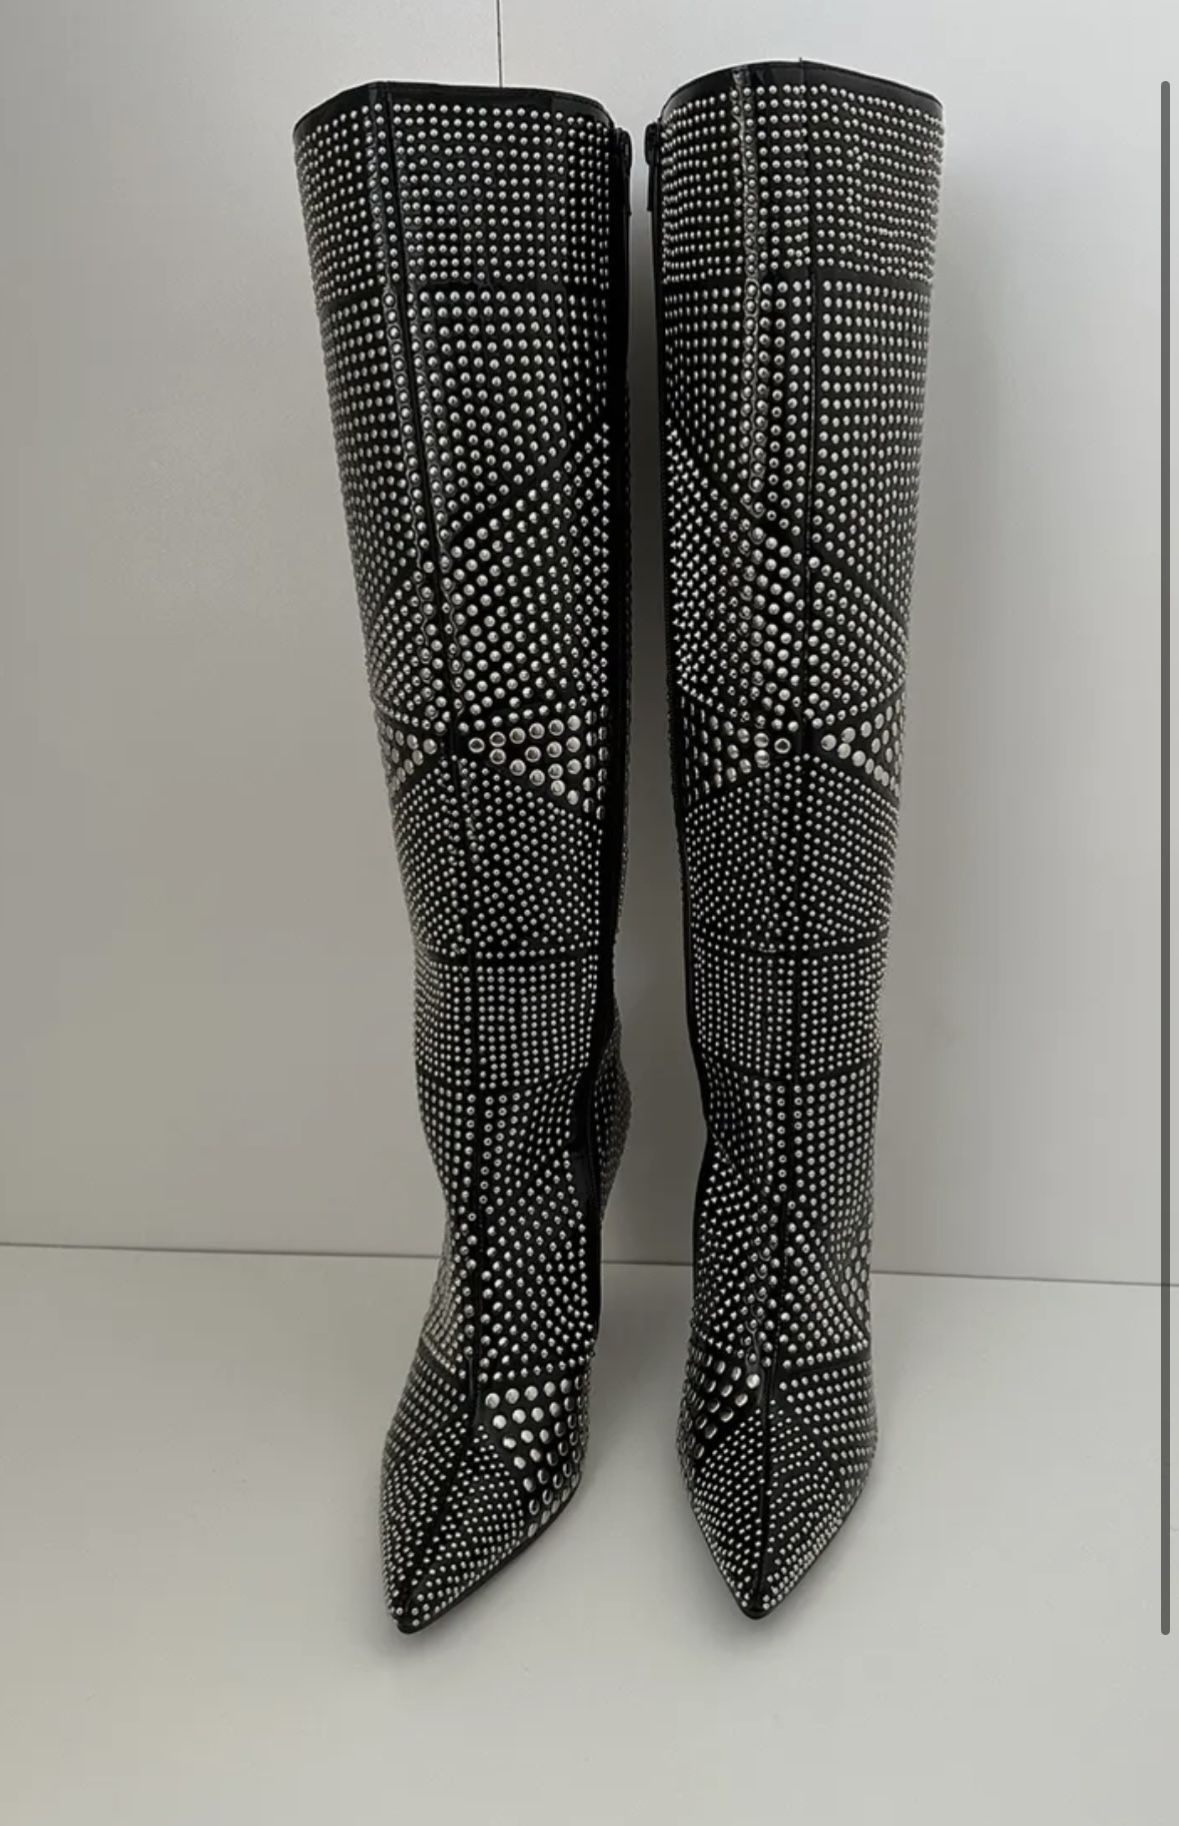 Brand New/Never worn Fully Studded Knee High Boots 